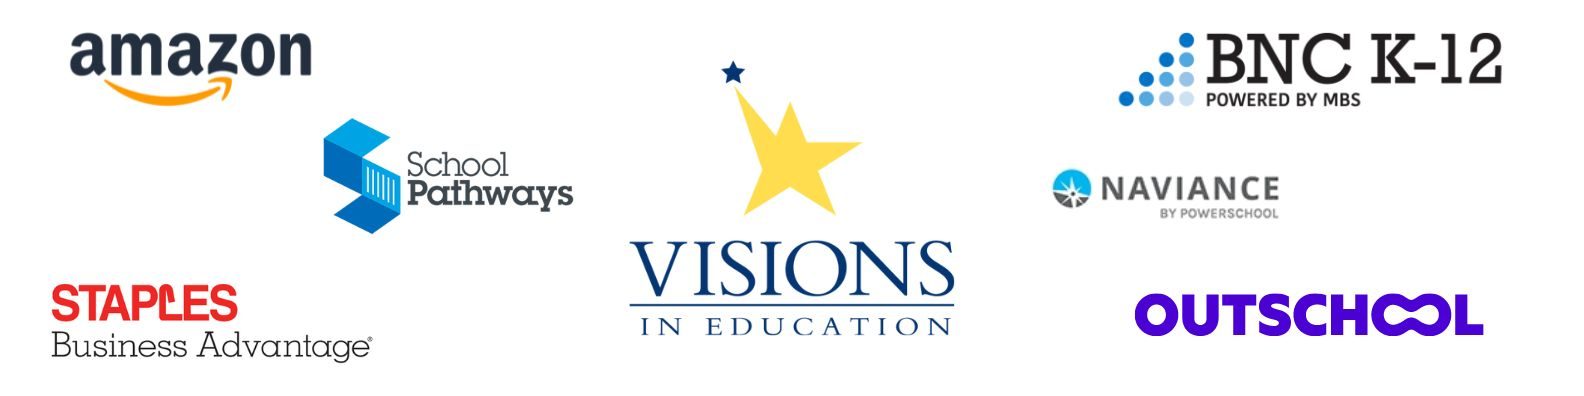 Visions In Education is proud to partner with many leading curriculum vendors and technology companies, like Amazon, to support our students.